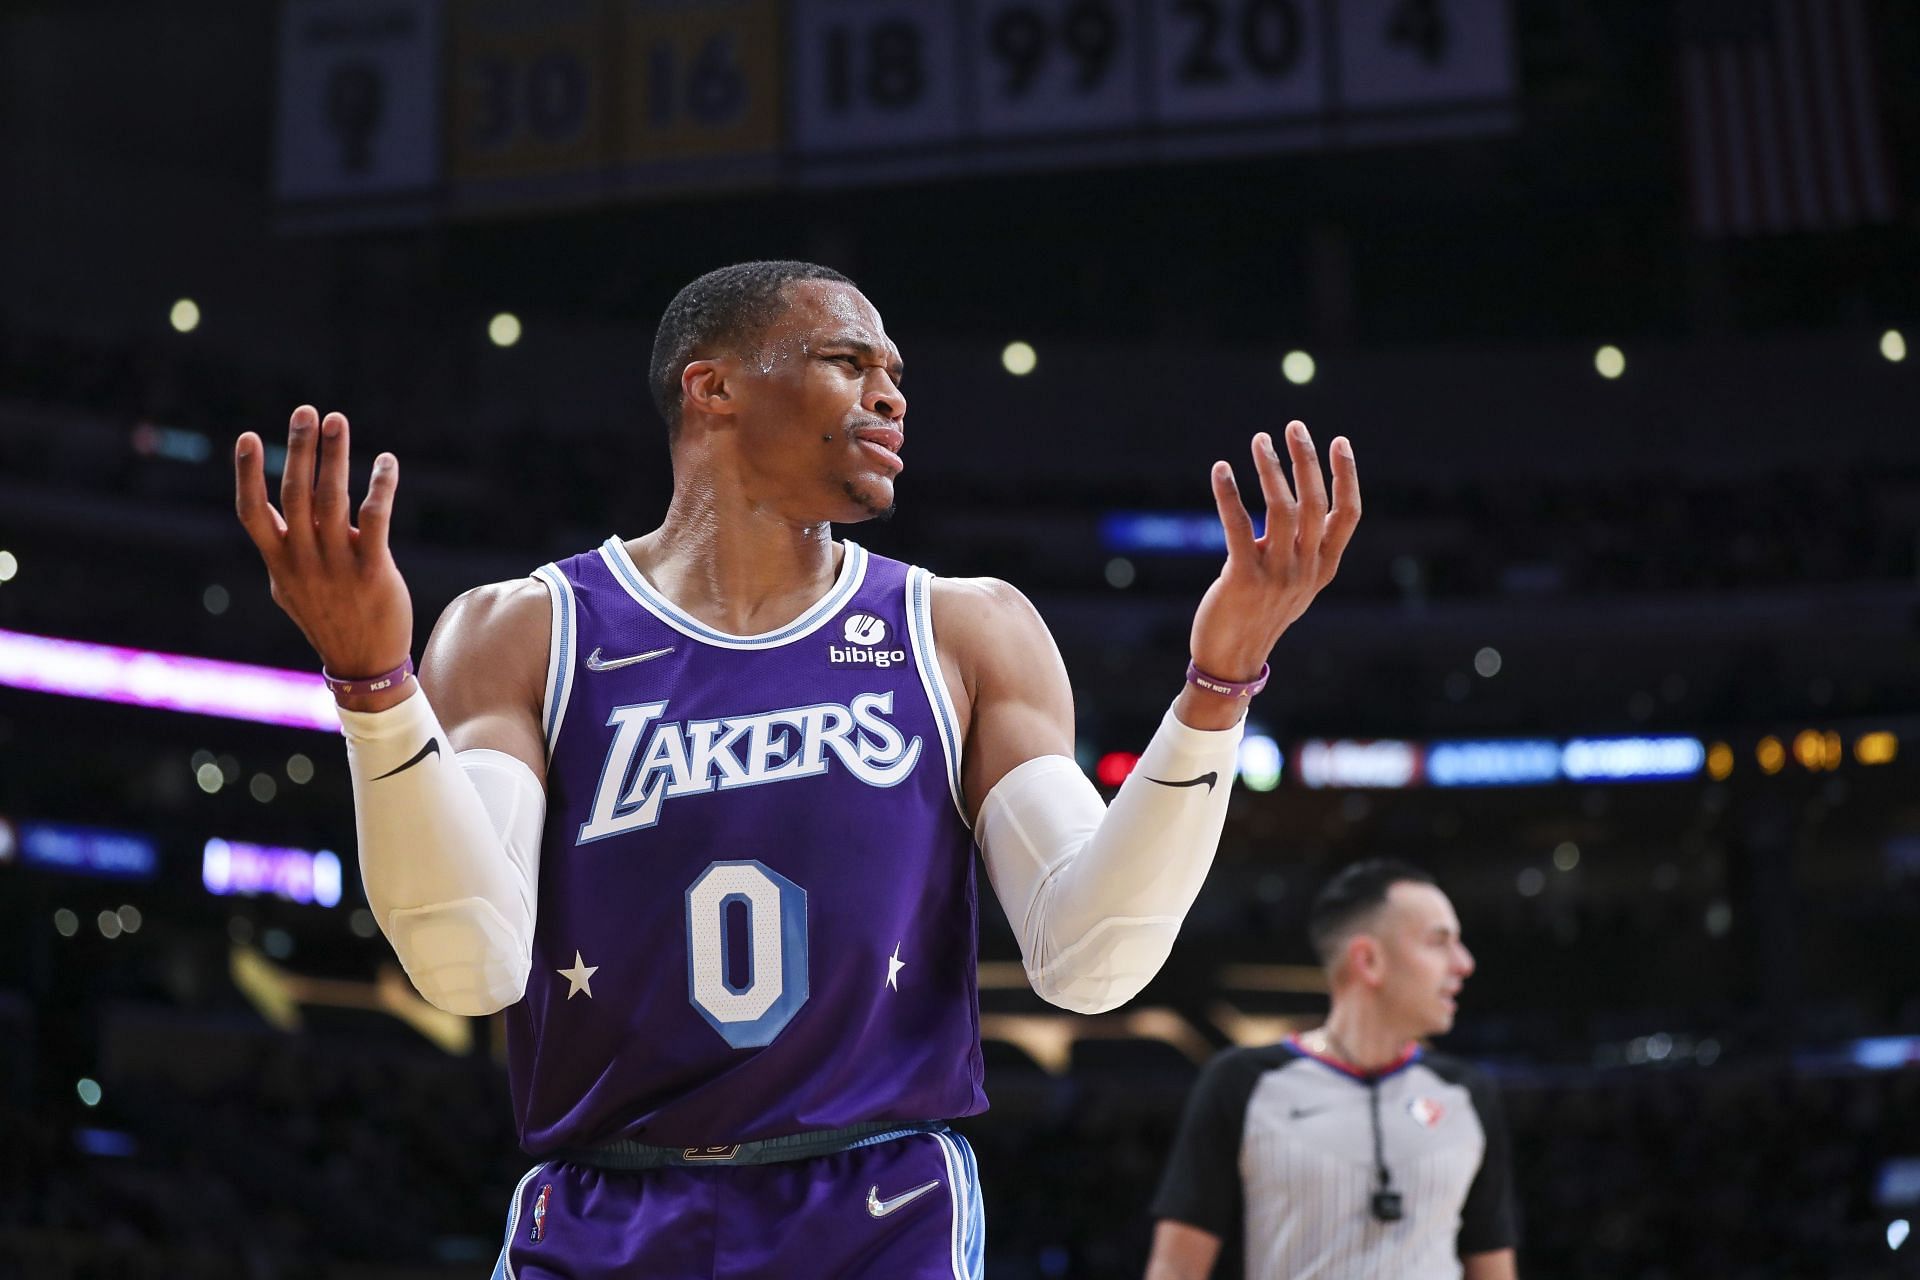 Russell Westbrook had just 8 points on 2-of-14 shooting for the LA Lakers against the Sacramento Kings